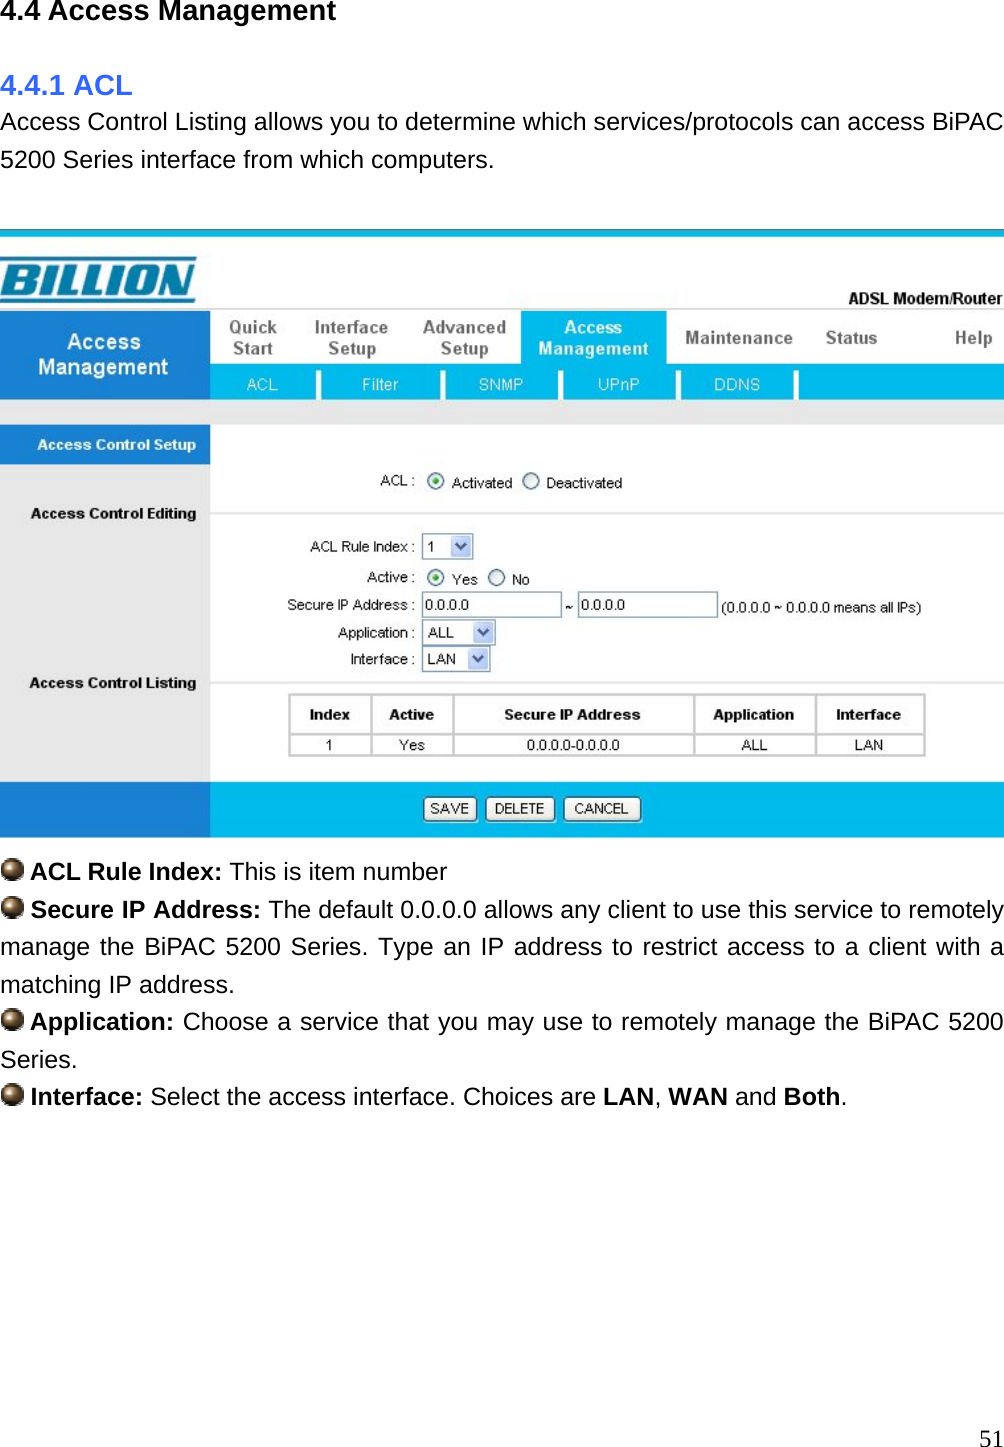 4.4 Access Management 4.4.1 ACL Access Control Listing allows you to determine which services/protocols can access BiPAC 5200 Series interface from which computers.    ACL Rule Index: This is item number  Secure IP Address: The default 0.0.0.0 allows any client to use this service to remotely manage the BiPAC 5200 Series. Type an IP address to restrict access to a client with a matching IP address.  Application: Choose a service that you may use to remotely manage the BiPAC 5200 Series.  Interface: Select the access interface. Choices are LAN, WAN and Both.         51